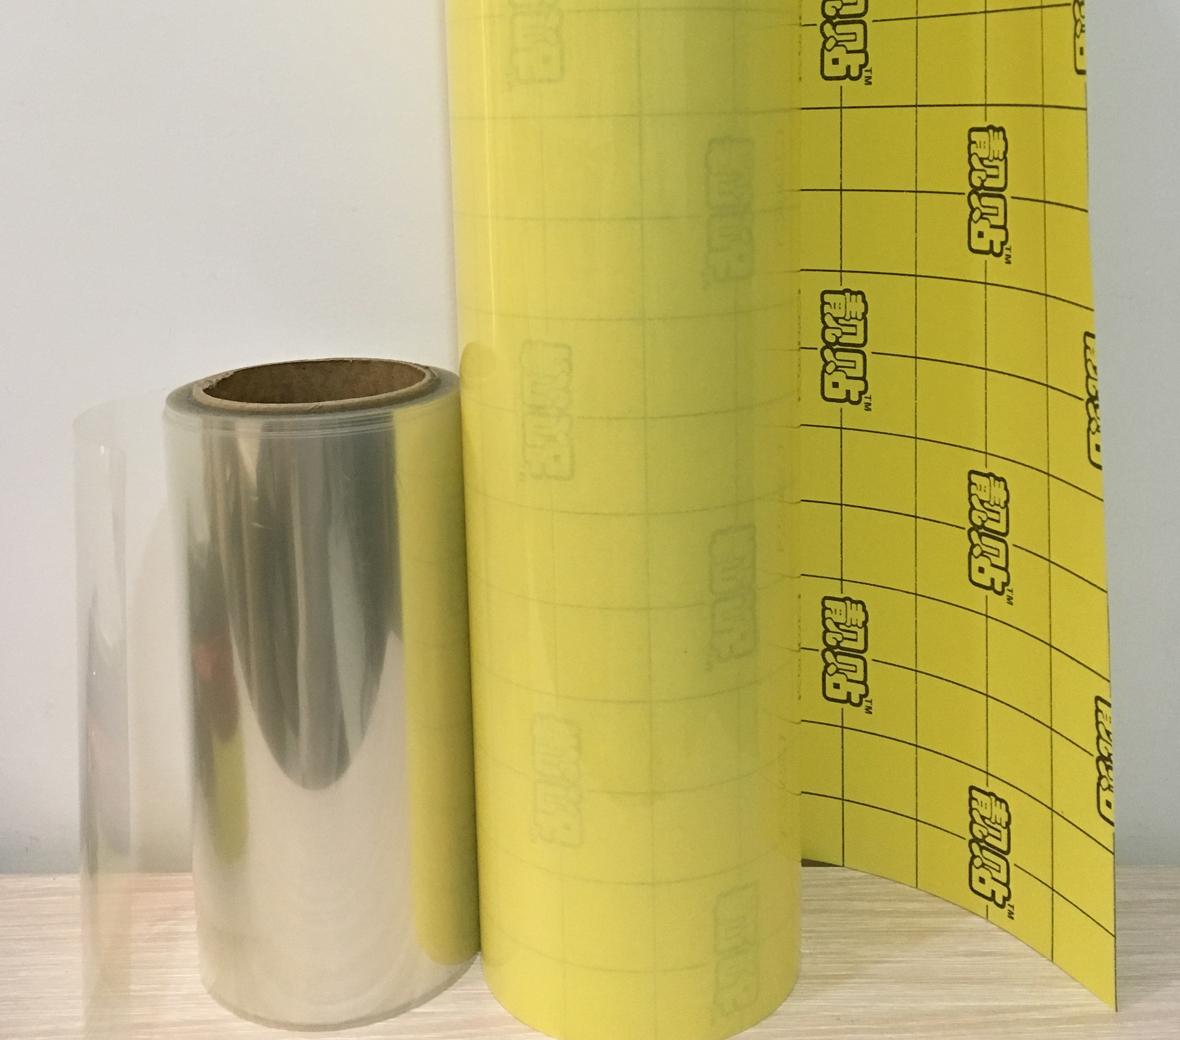 Application adhesive polyester film